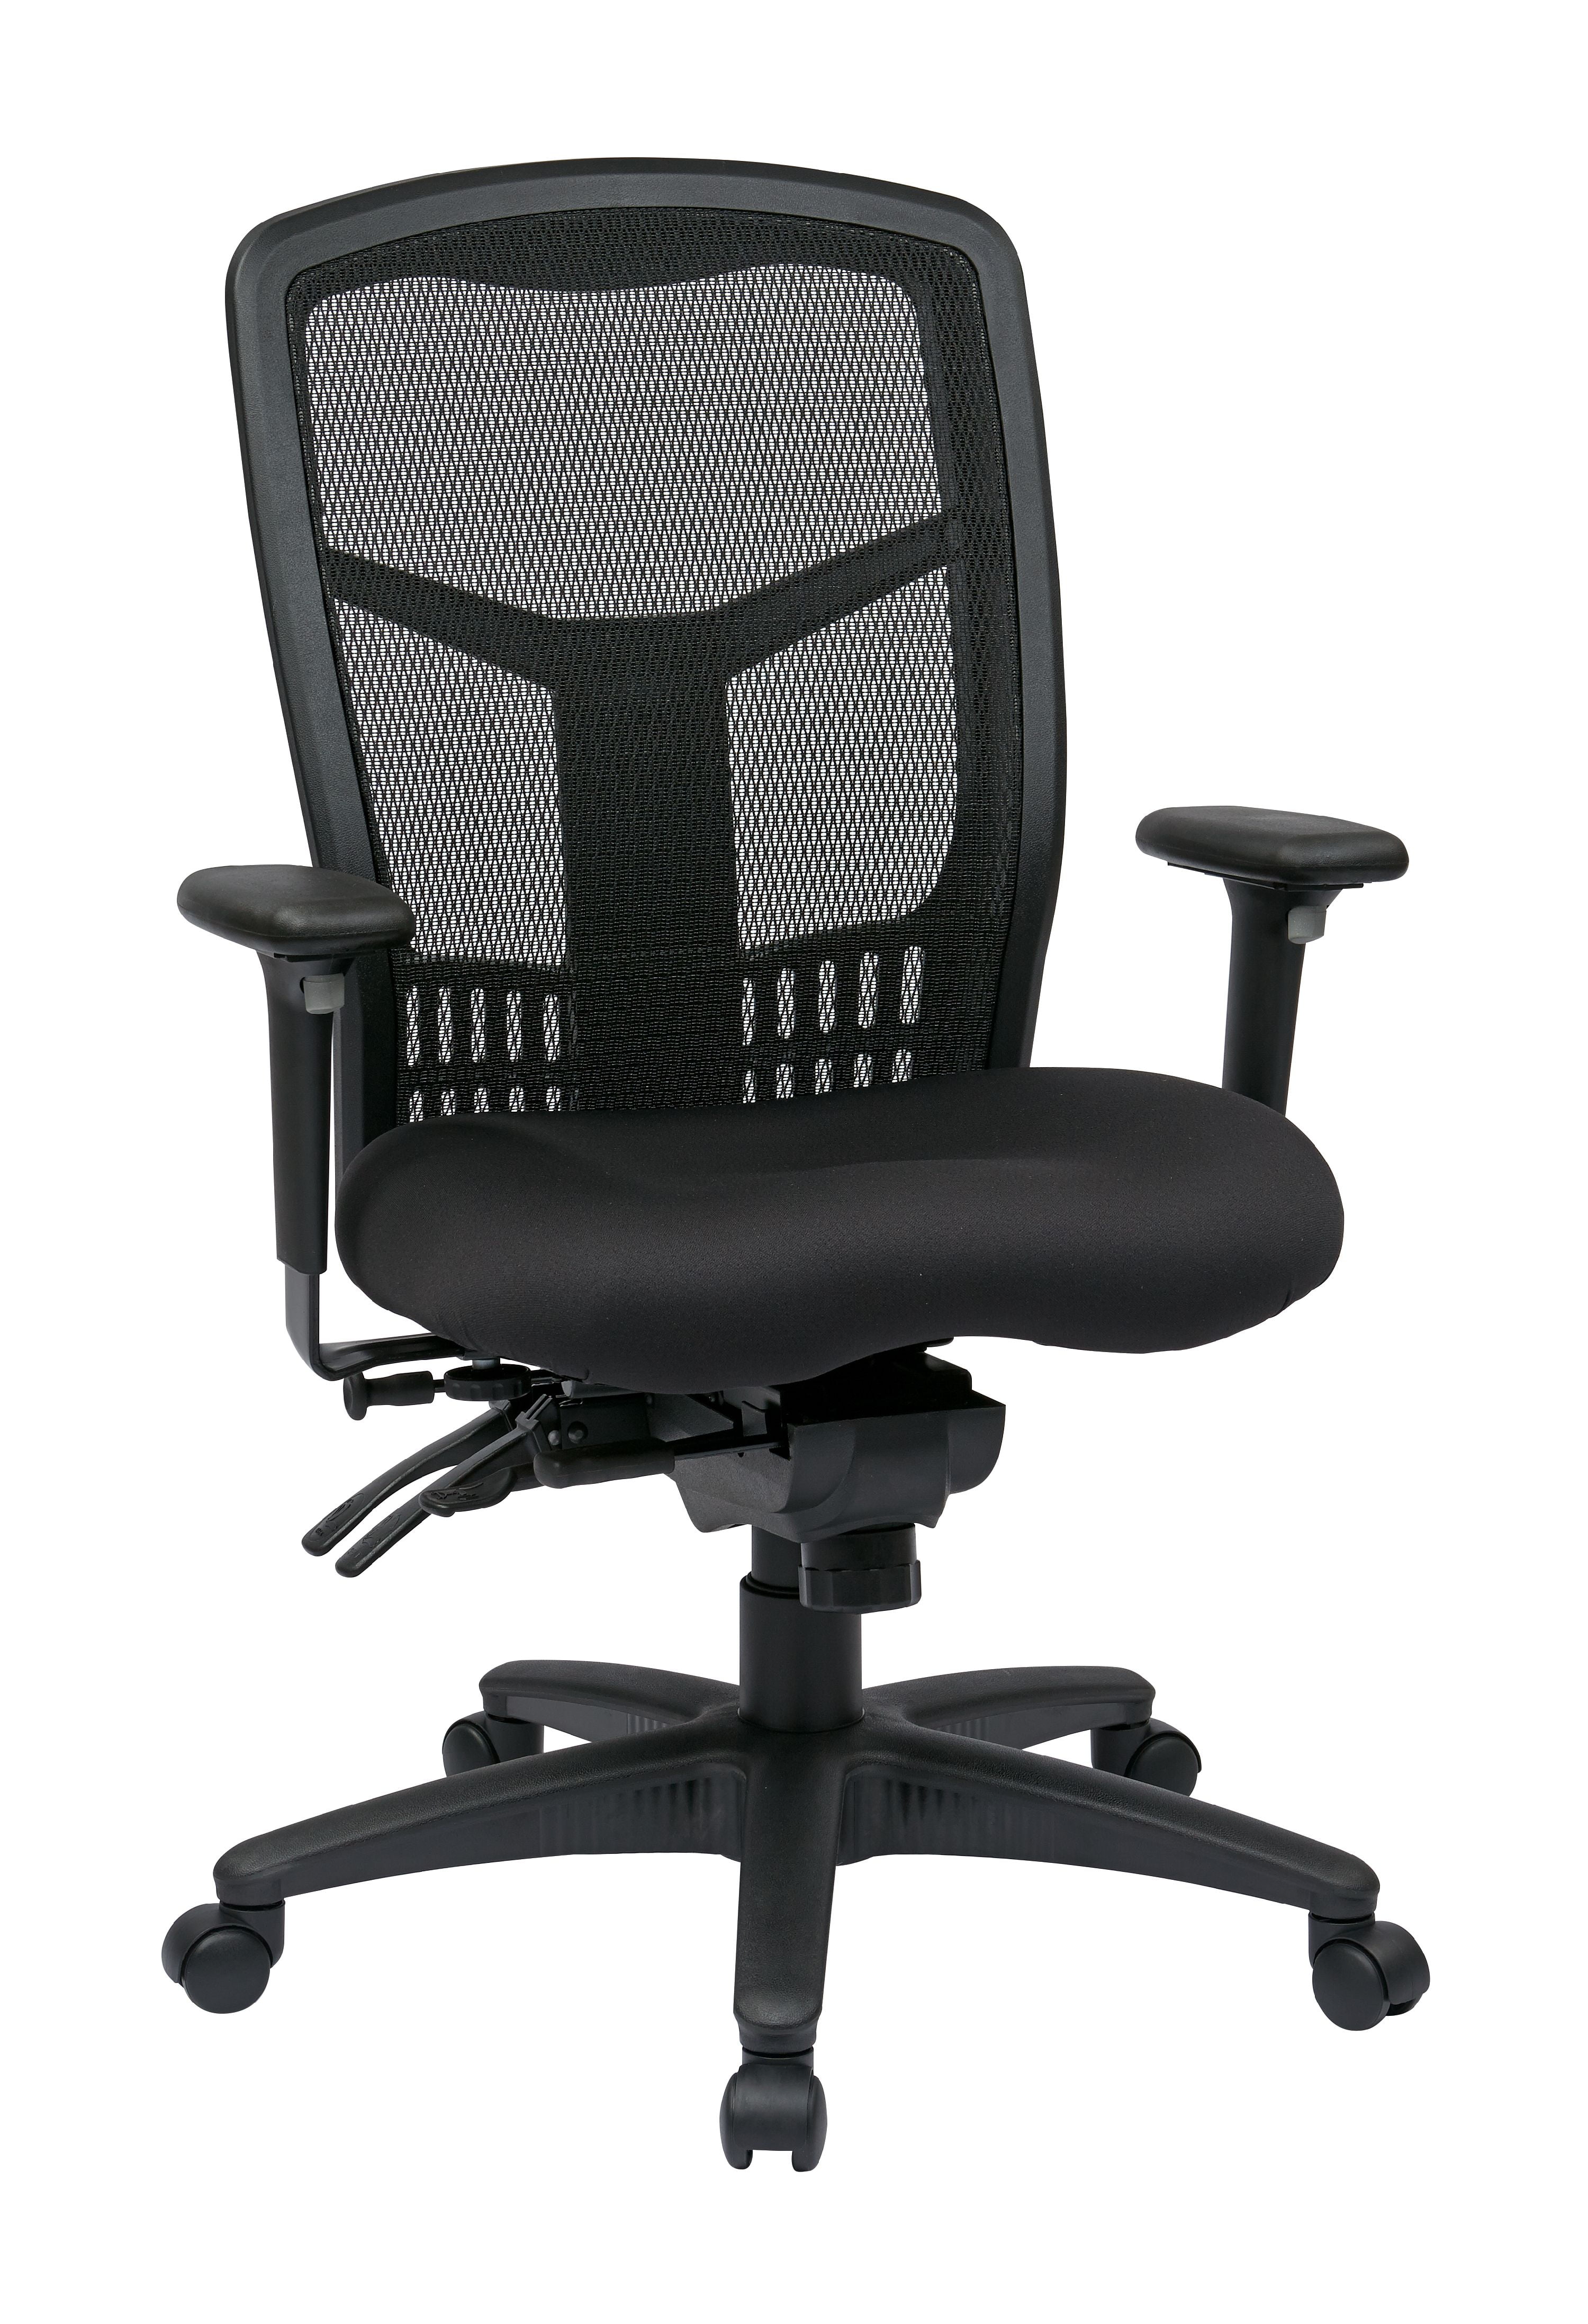 Professional AirGrid Dark Back and Padded Black Eco Leather Seat, 2-to-1  Synchro Tilt Control, Adjustable Arms and Tilt Tension with Nylon Base  Managers Chair - Walmart.com